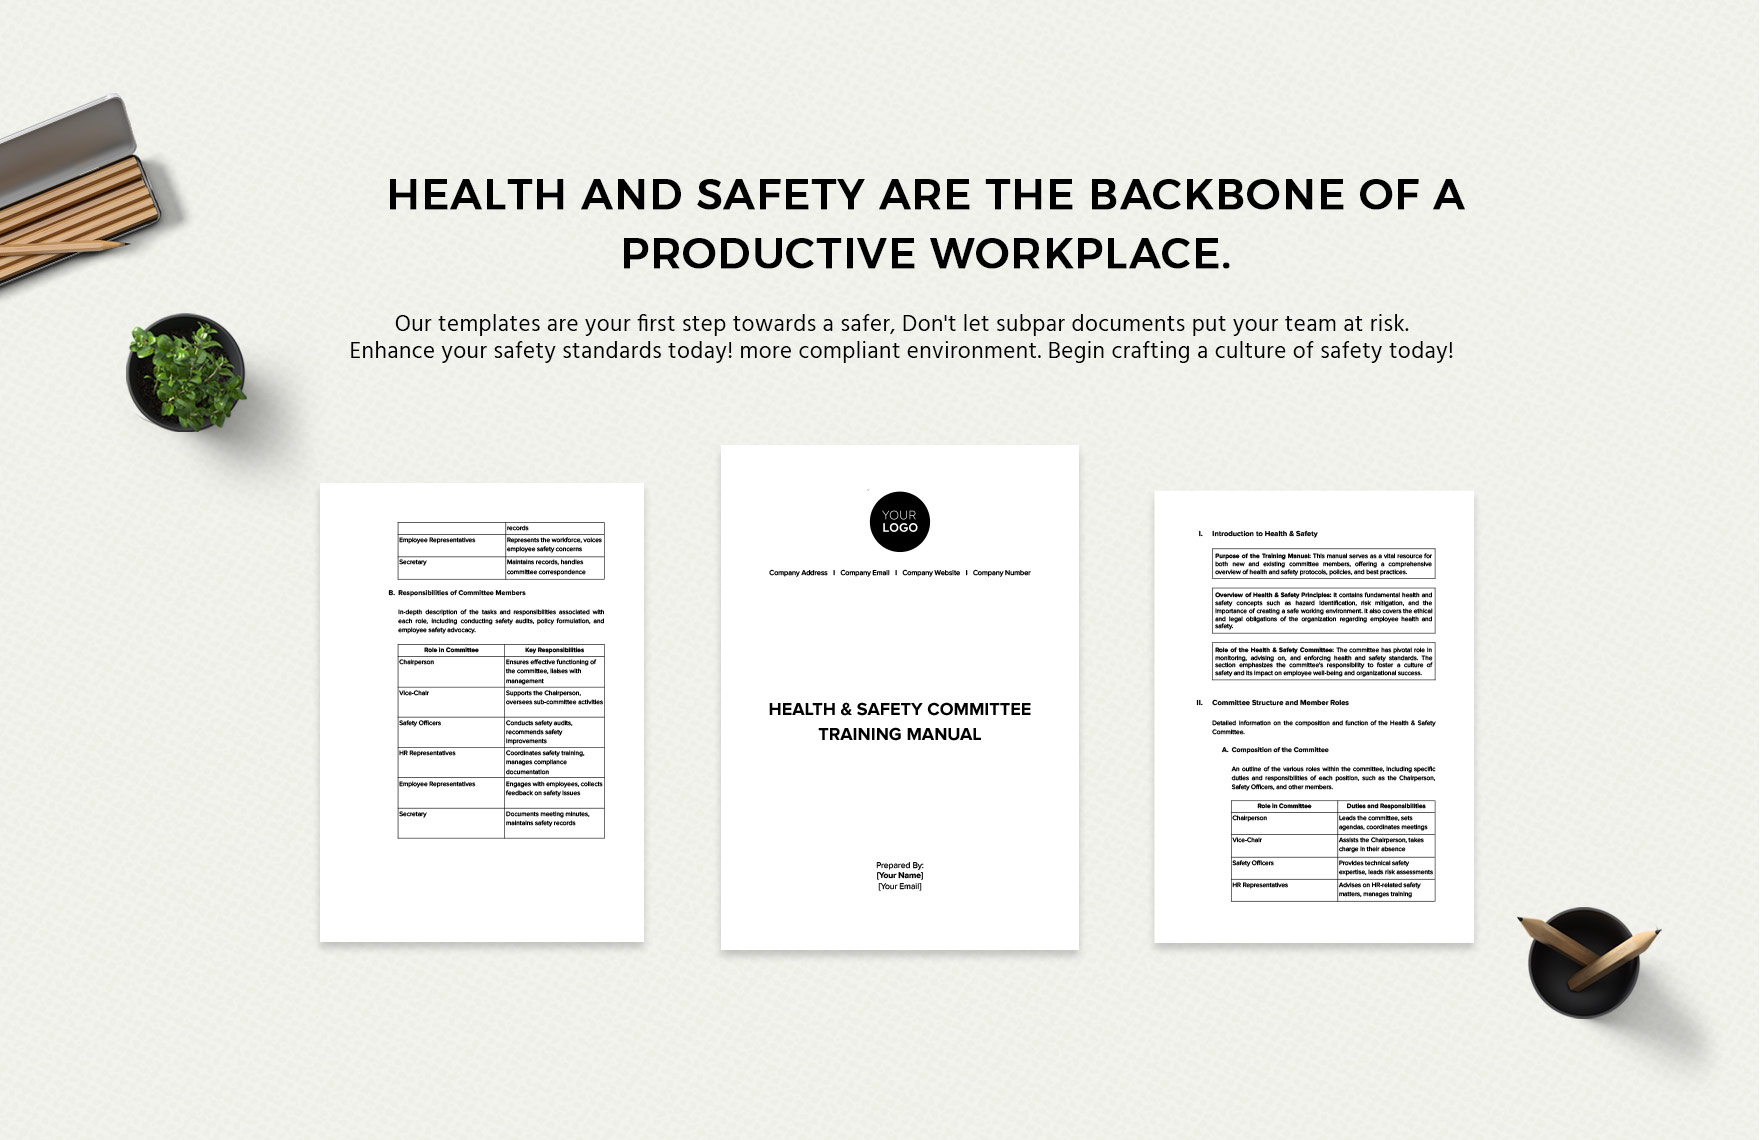 Health & Safety Committee Training Manual Template